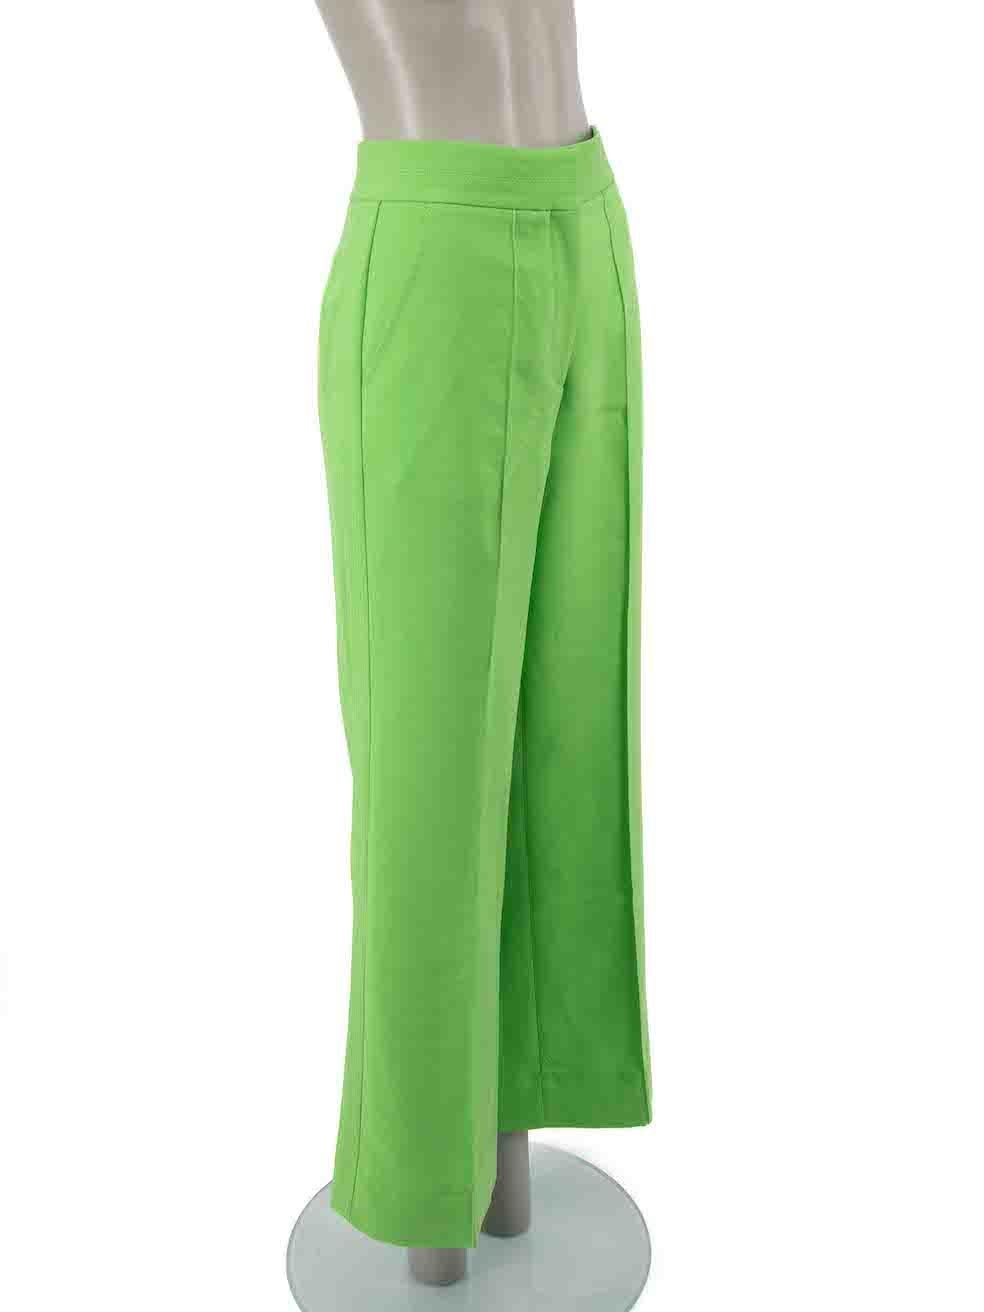 CONDITION is Very good. Hardly any visible wear to trousers is evident on this used ME+EM designer resale item.
 
Details
Lime green
Polyester
Wide leg trousers
High rise
Front zip closure with clasps and button
2x Front side pockets
2x Back